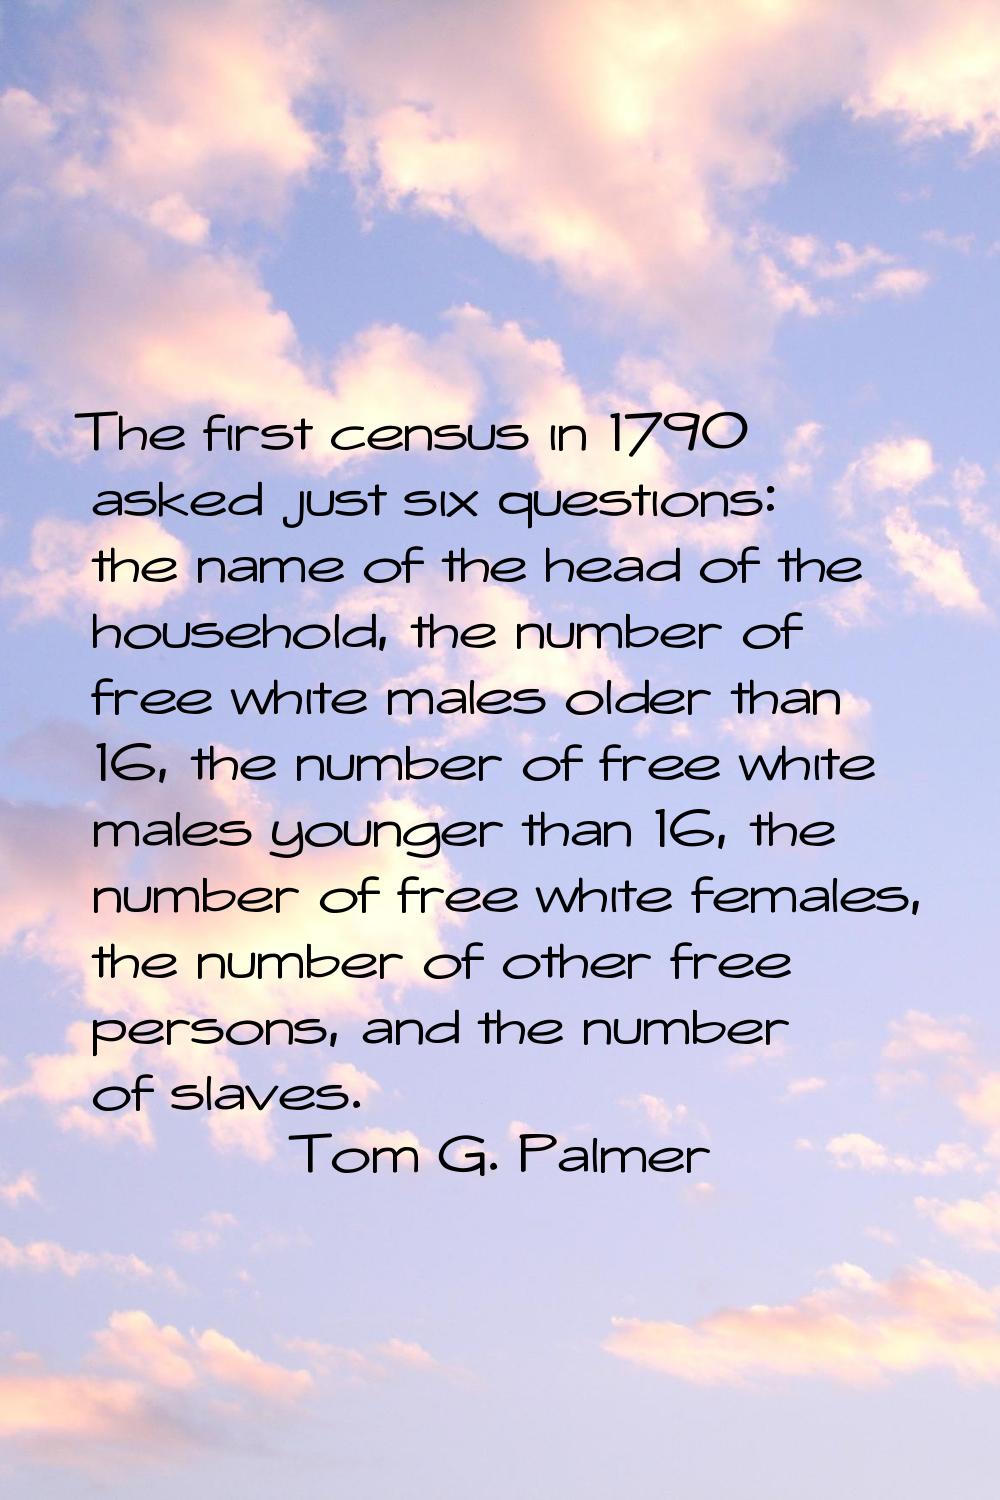 The first census in 1790 asked just six questions: the name of the head of the household, the numbe